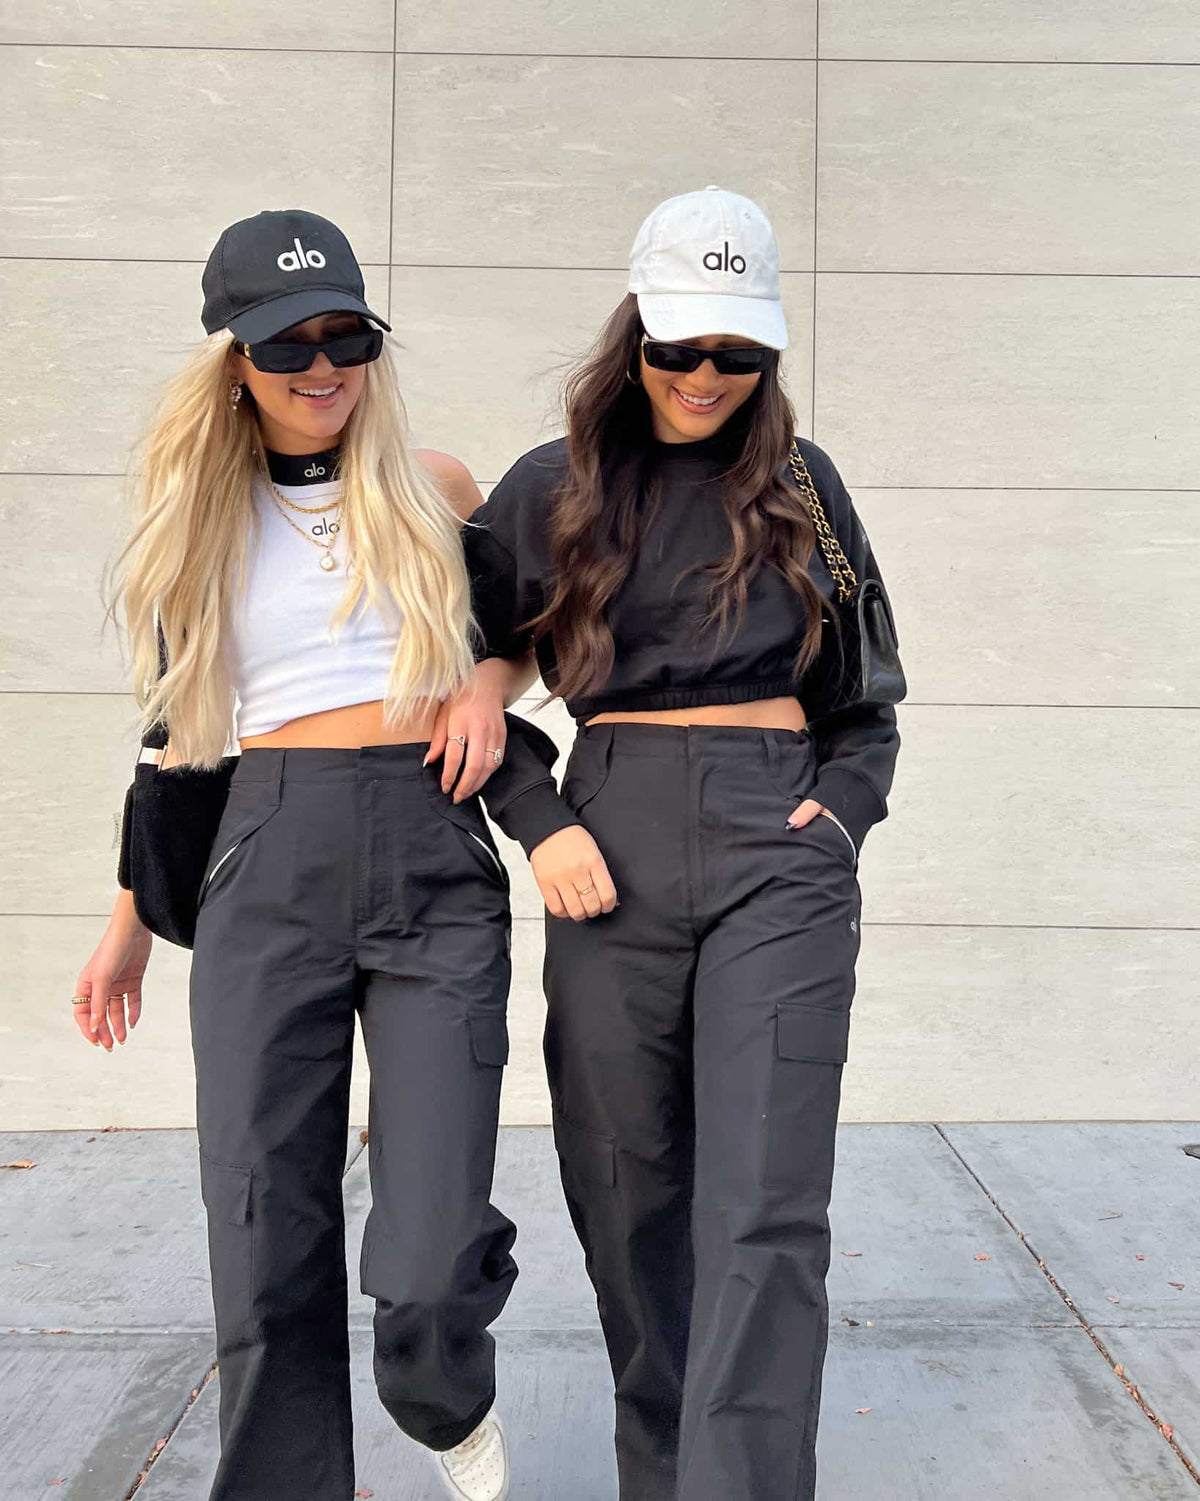 @fashionablysurfed and @shestyledwhat both wearing a pair of Black Edge Trousers with Alo hats and cropped tops walking arm in arm down a street sidewalk. 